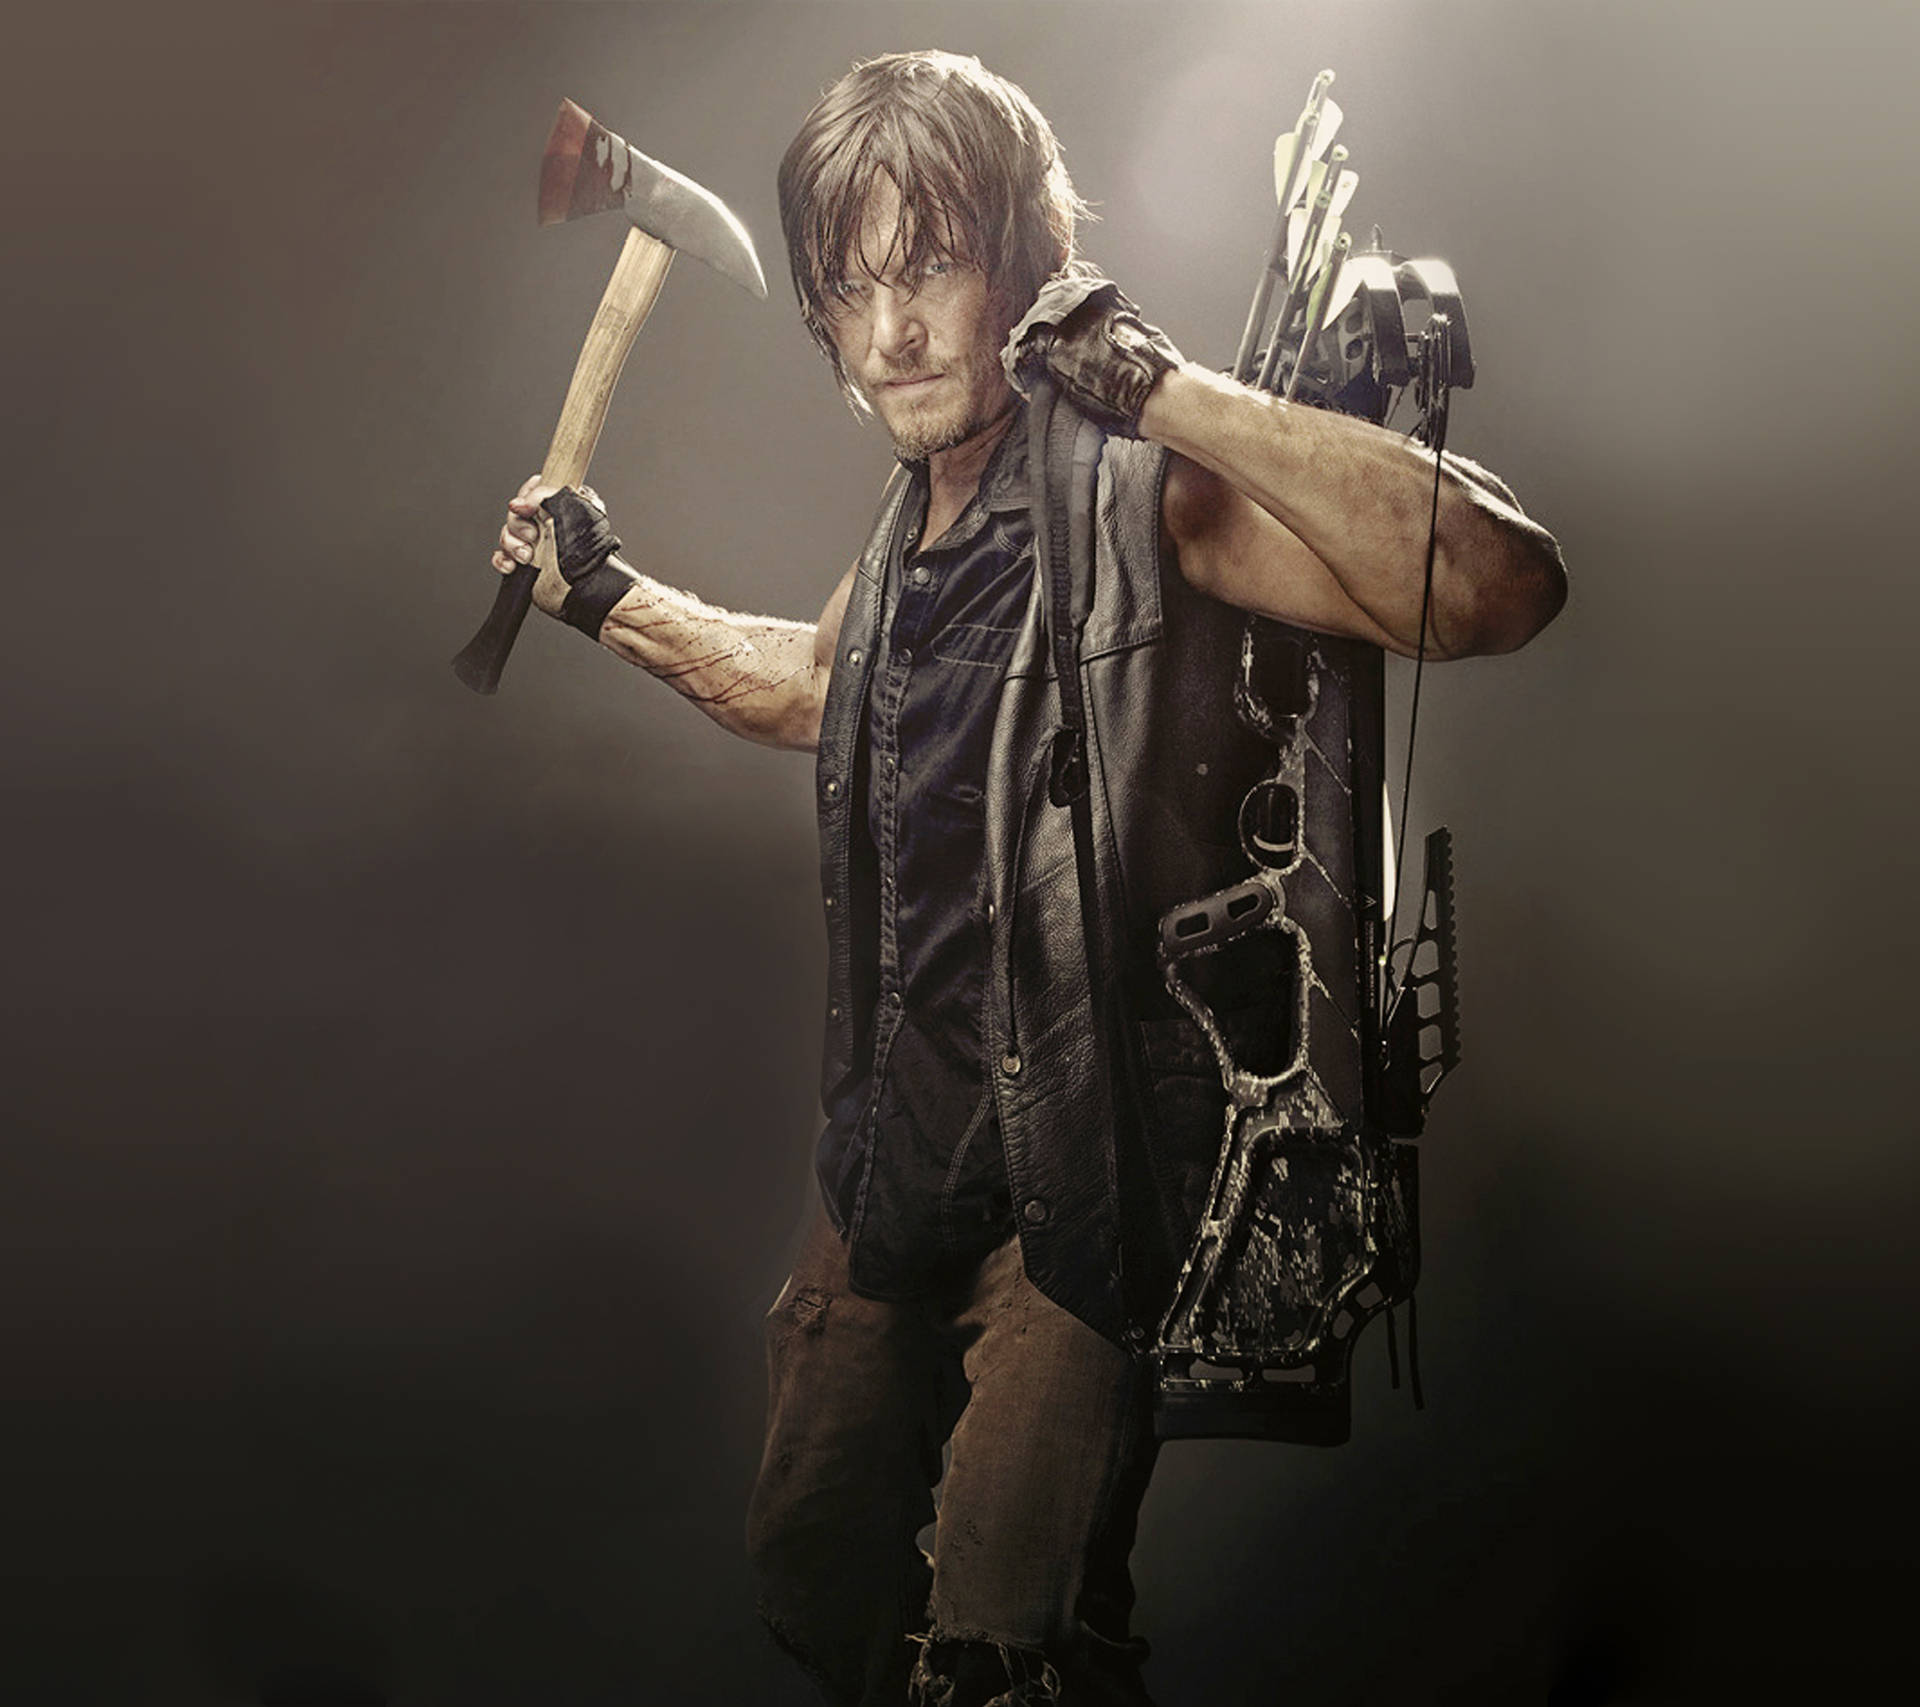 Walking Dead Daryl With Weapons Wallpaper